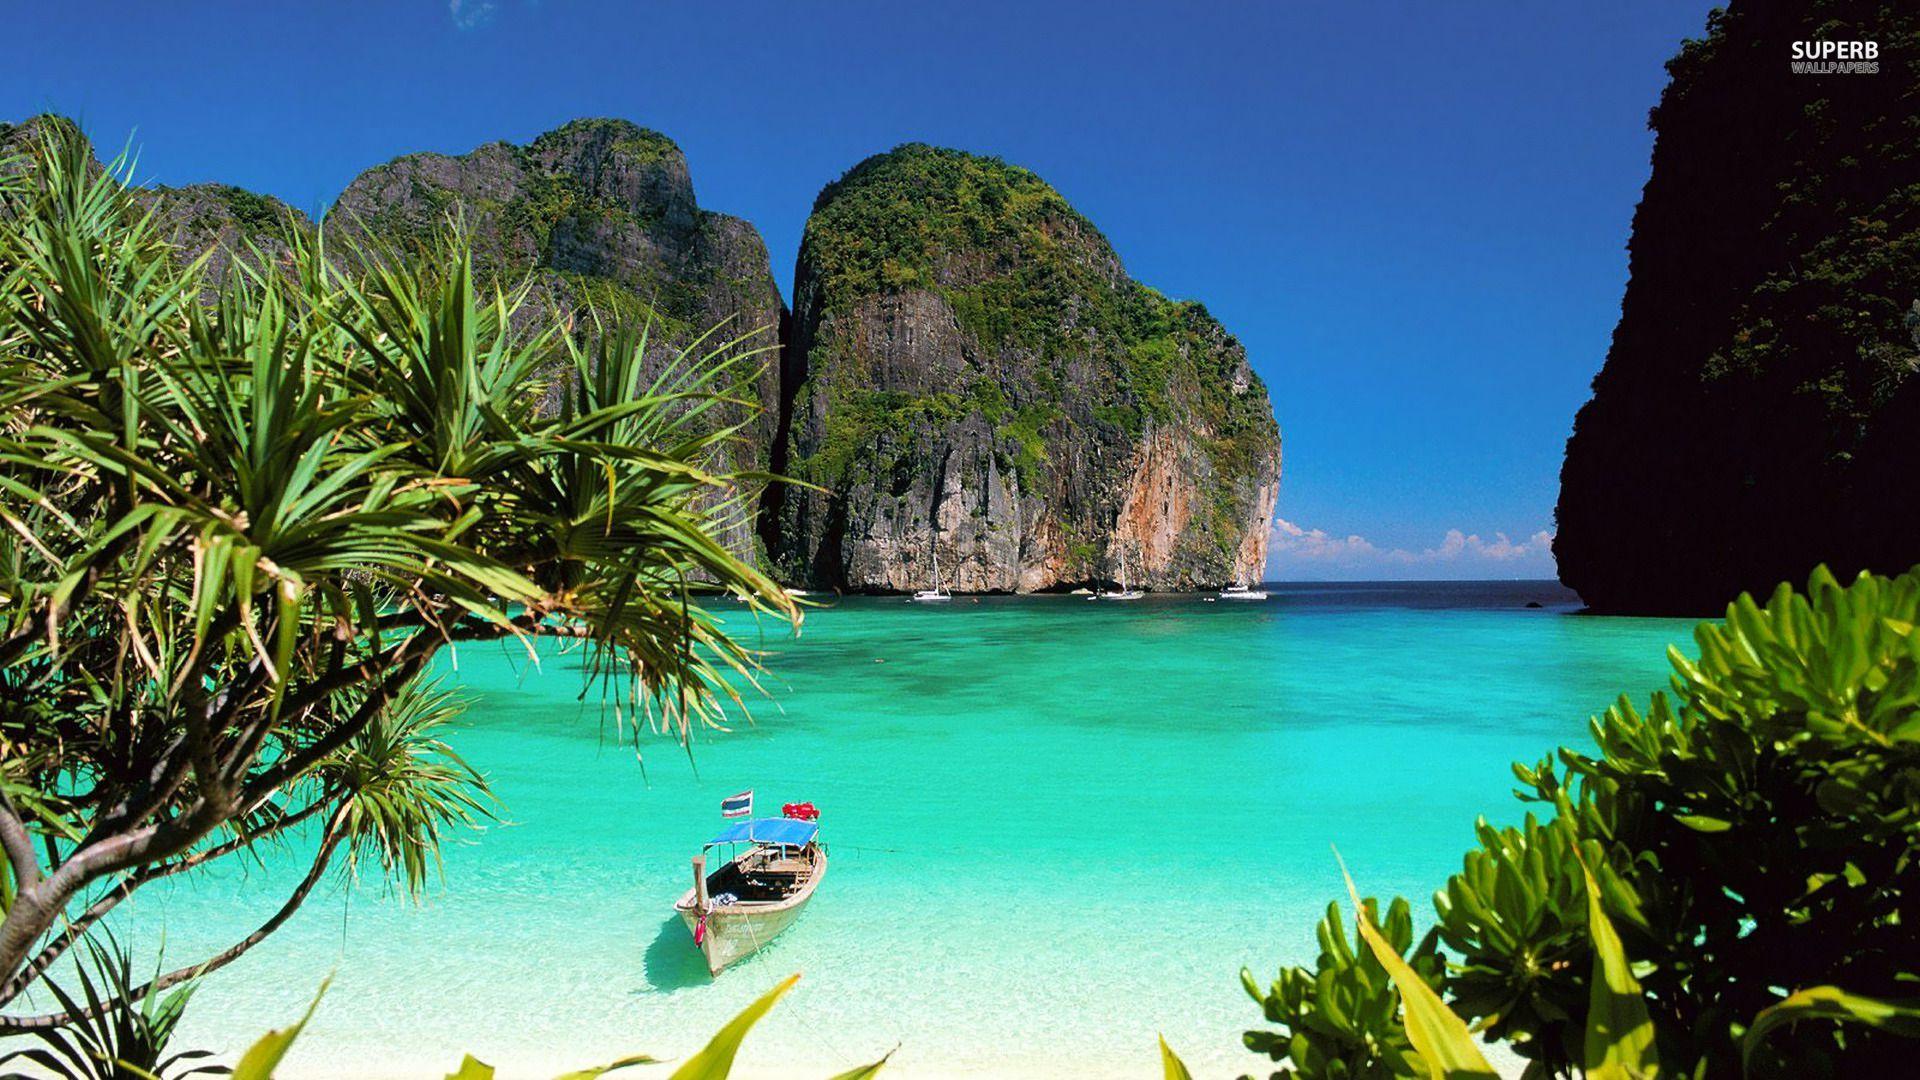 Quality Thailand Wallpaper, Countries